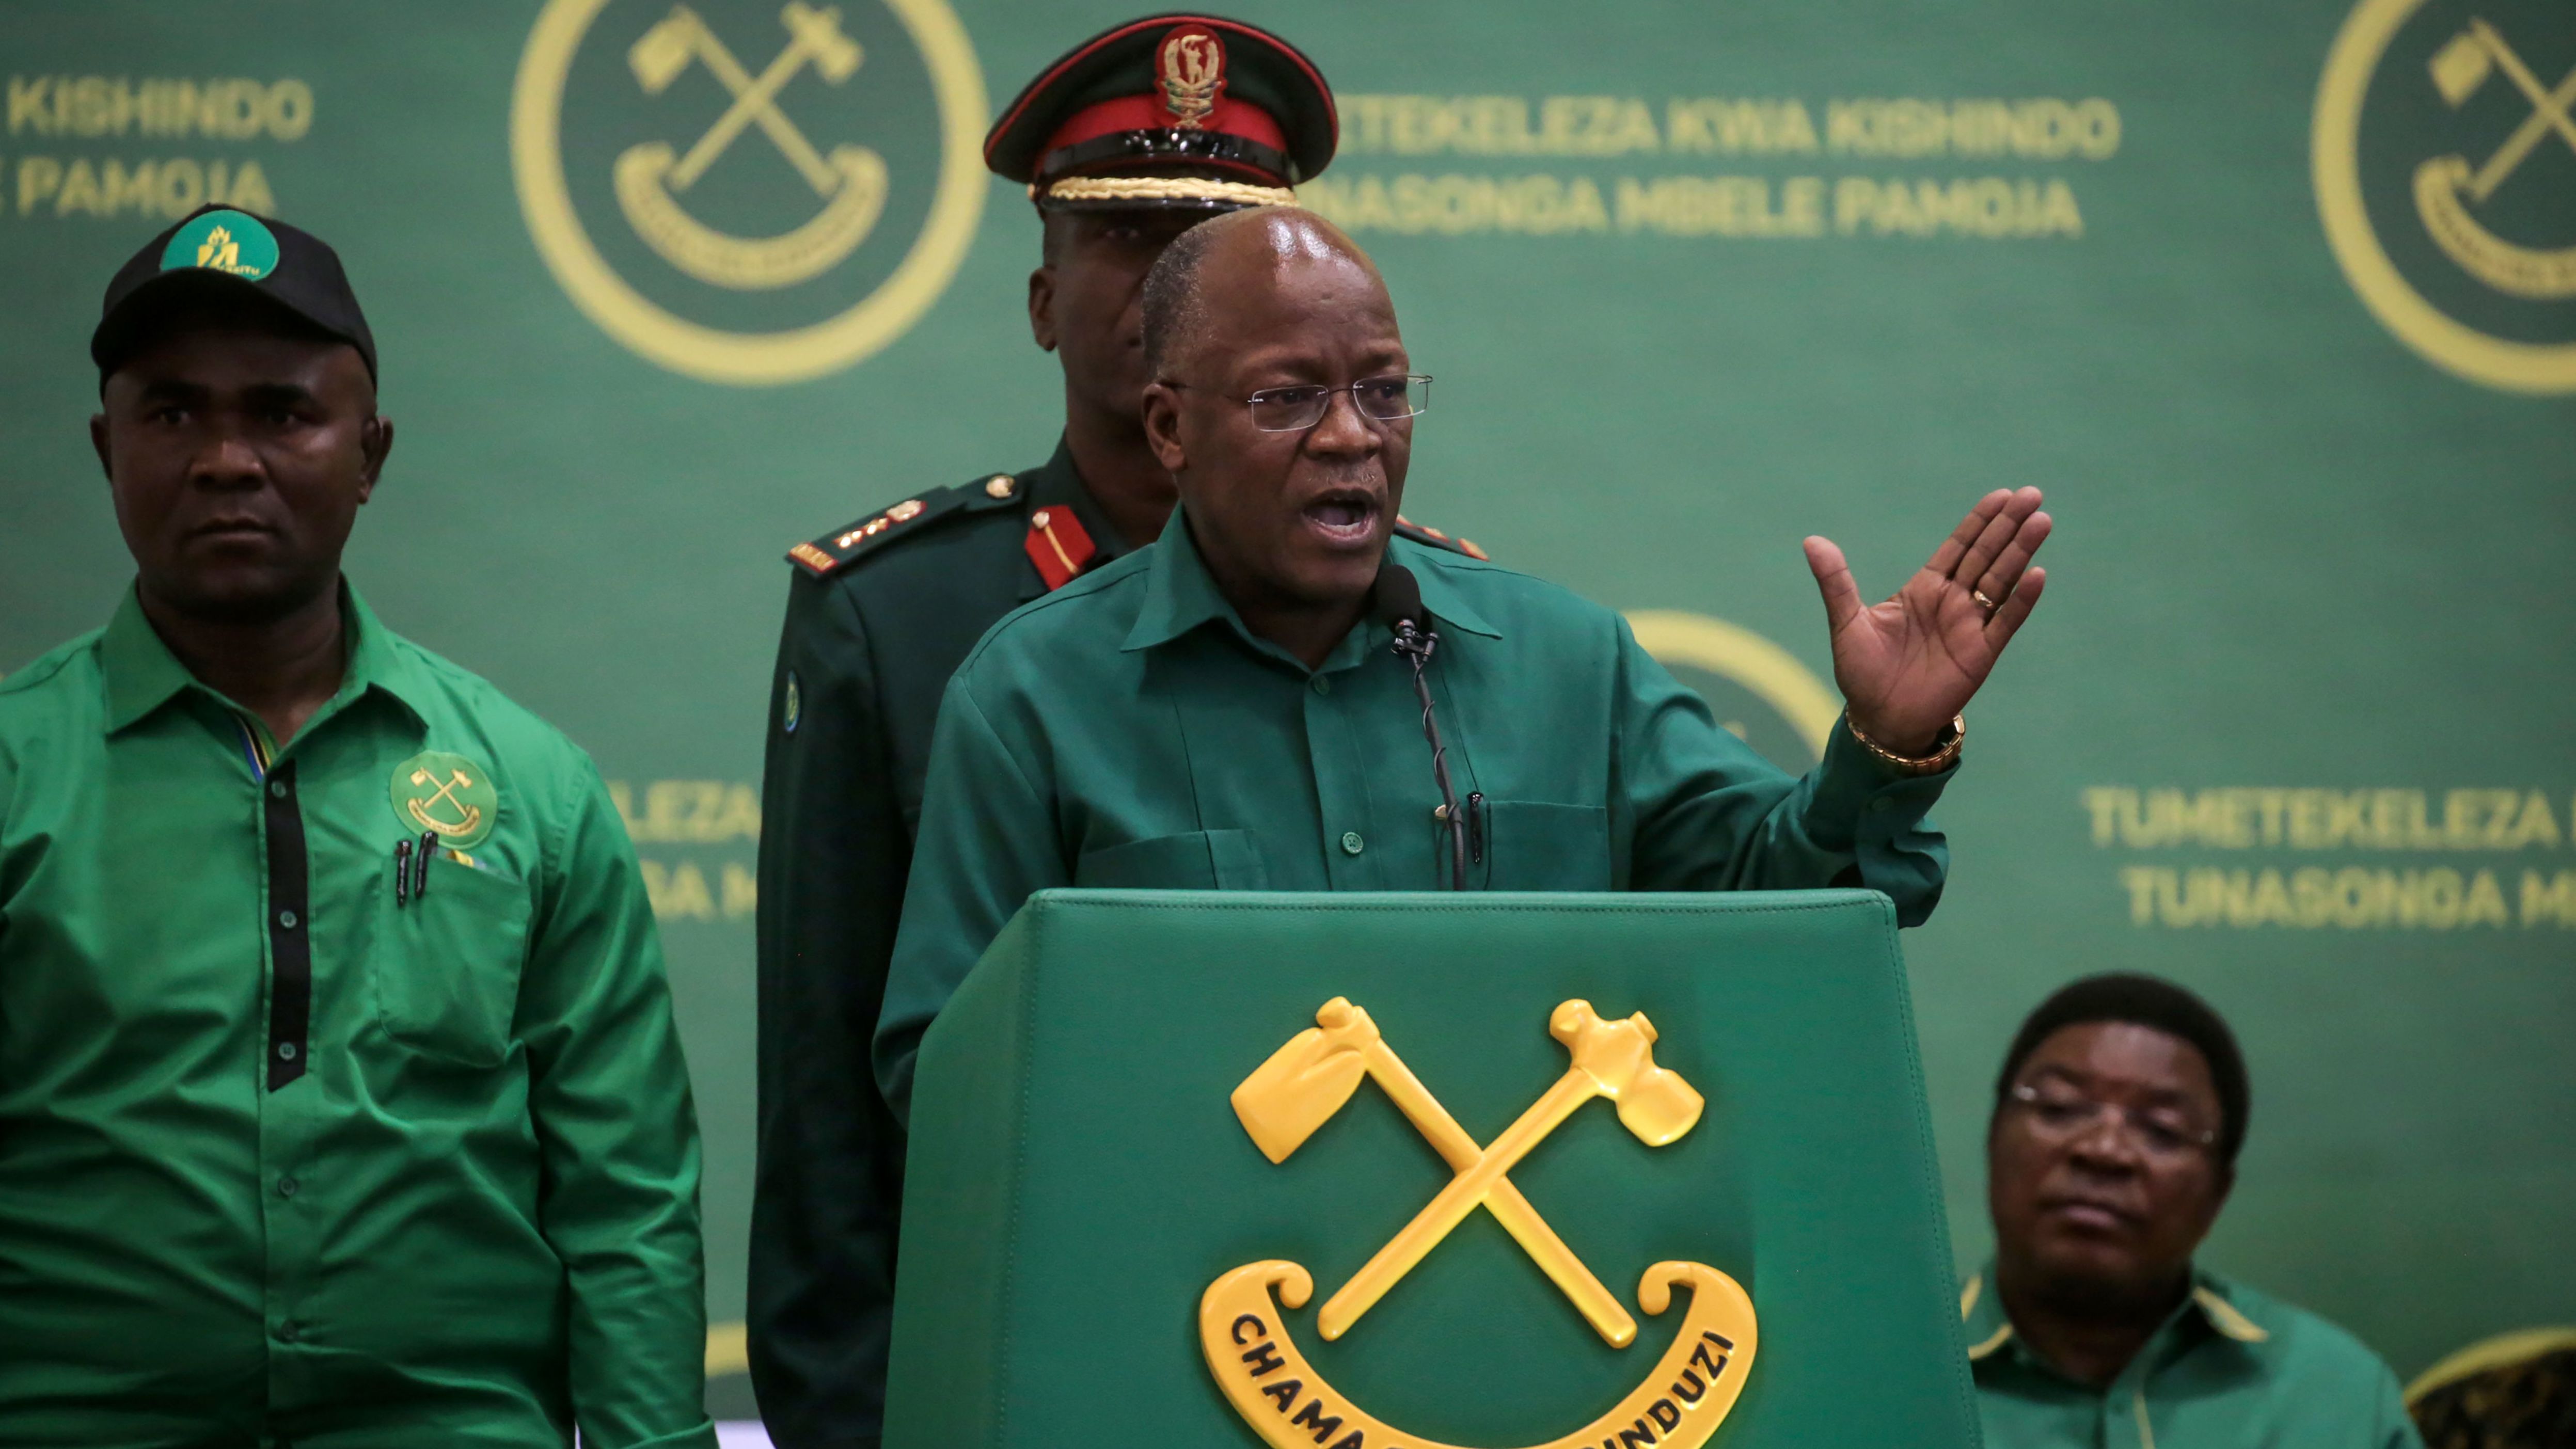 President John Magufuli speaks at the national congress of his party in Dodoma, Tanzania on July 11